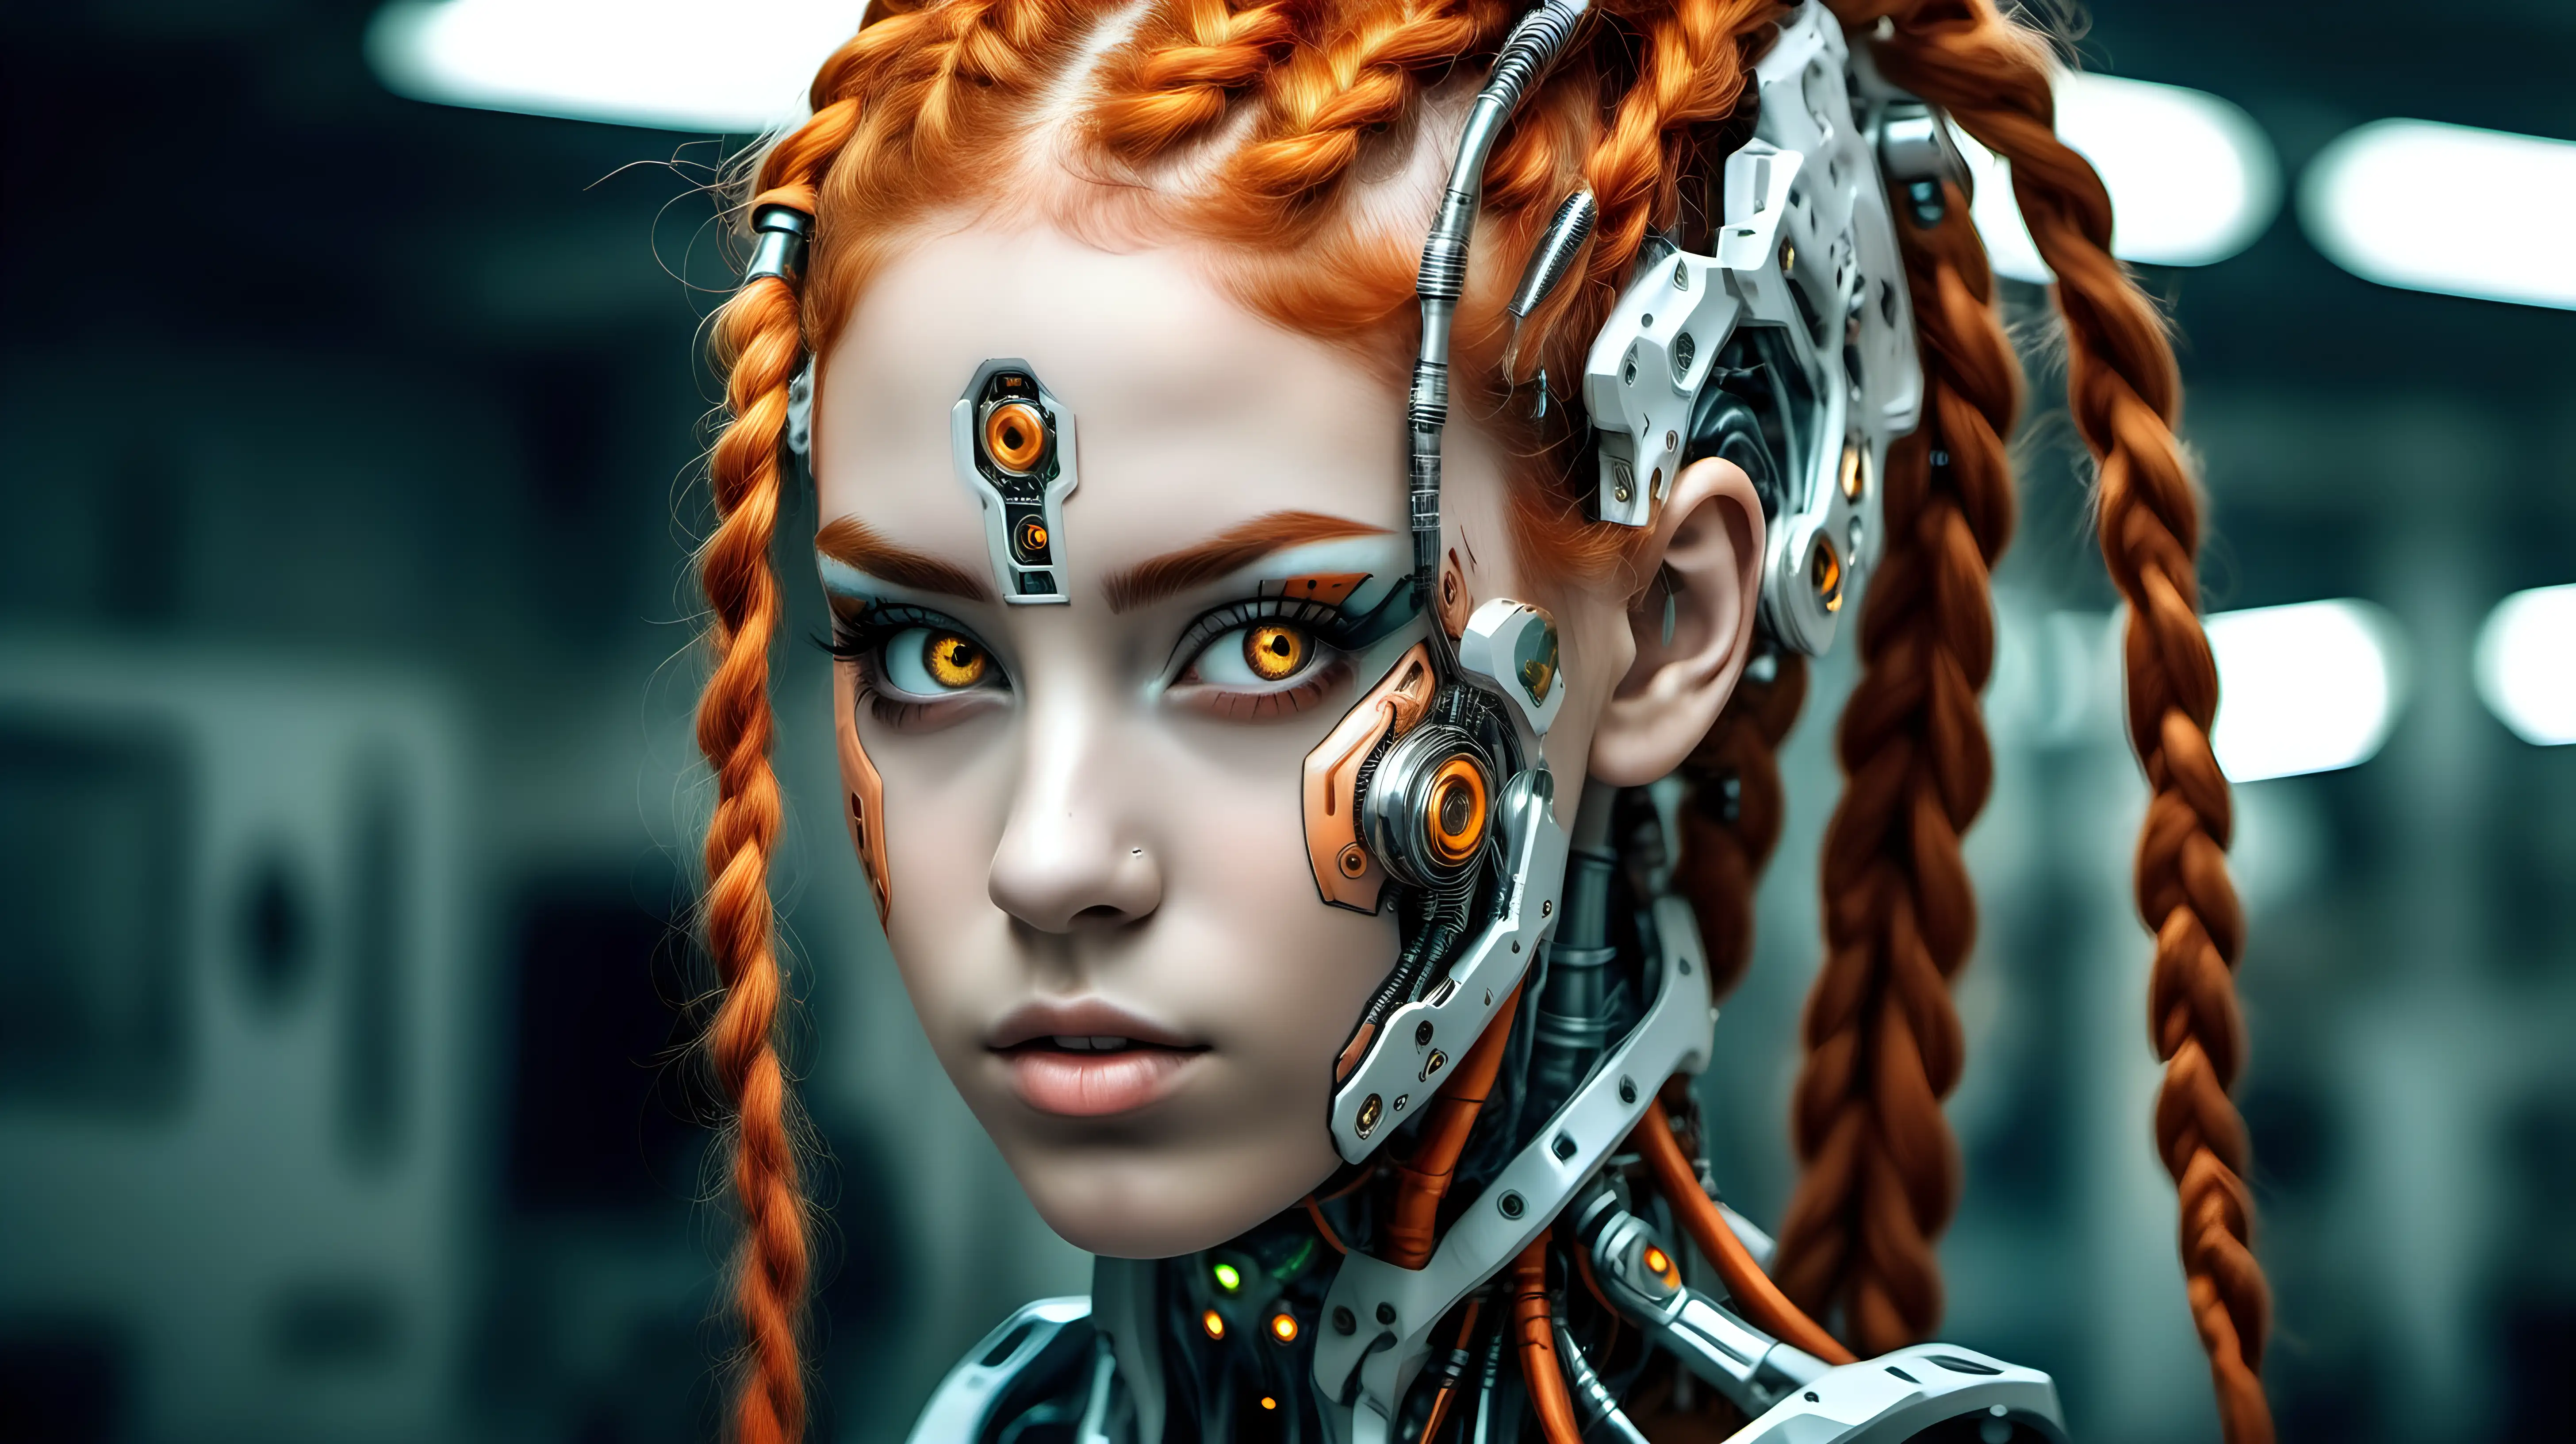 Gorgeous cyborg woman, 18 years old. She has a cyborg face, but she is extremely beautiful. Wild hair, orange braids, green eyes,